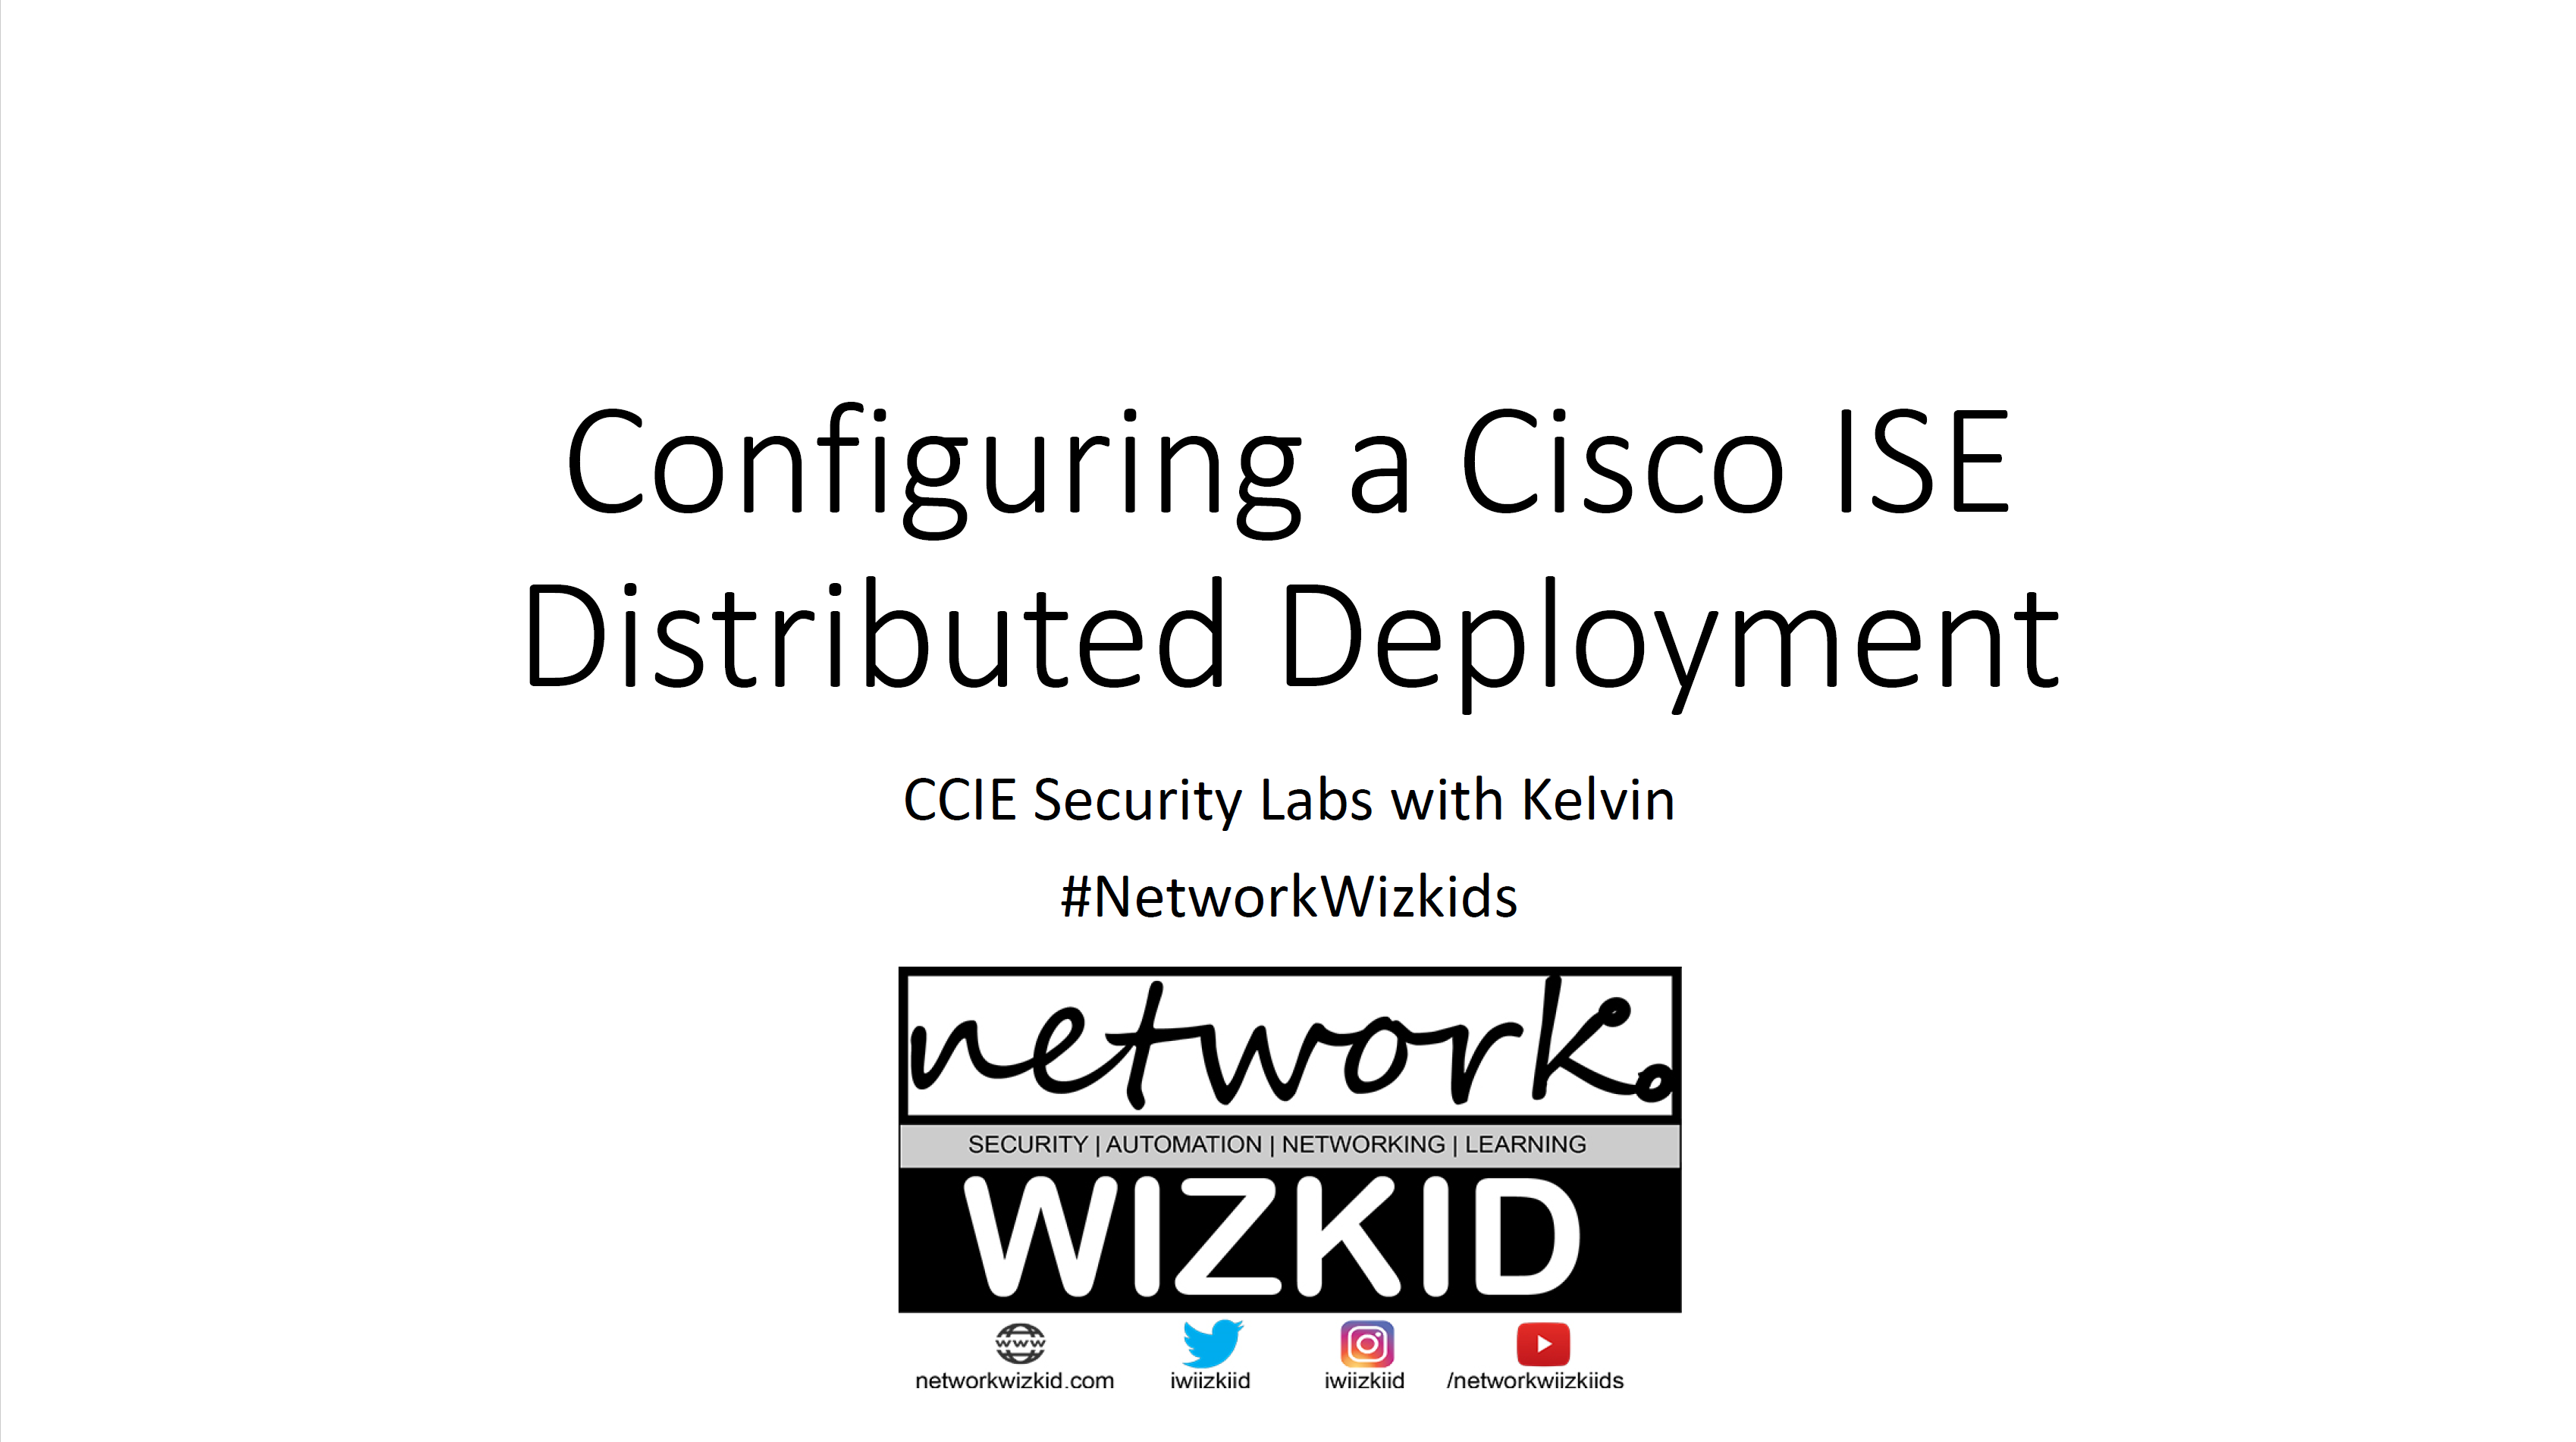 Video: Configuring a Cisco ISE Distributed Deployment